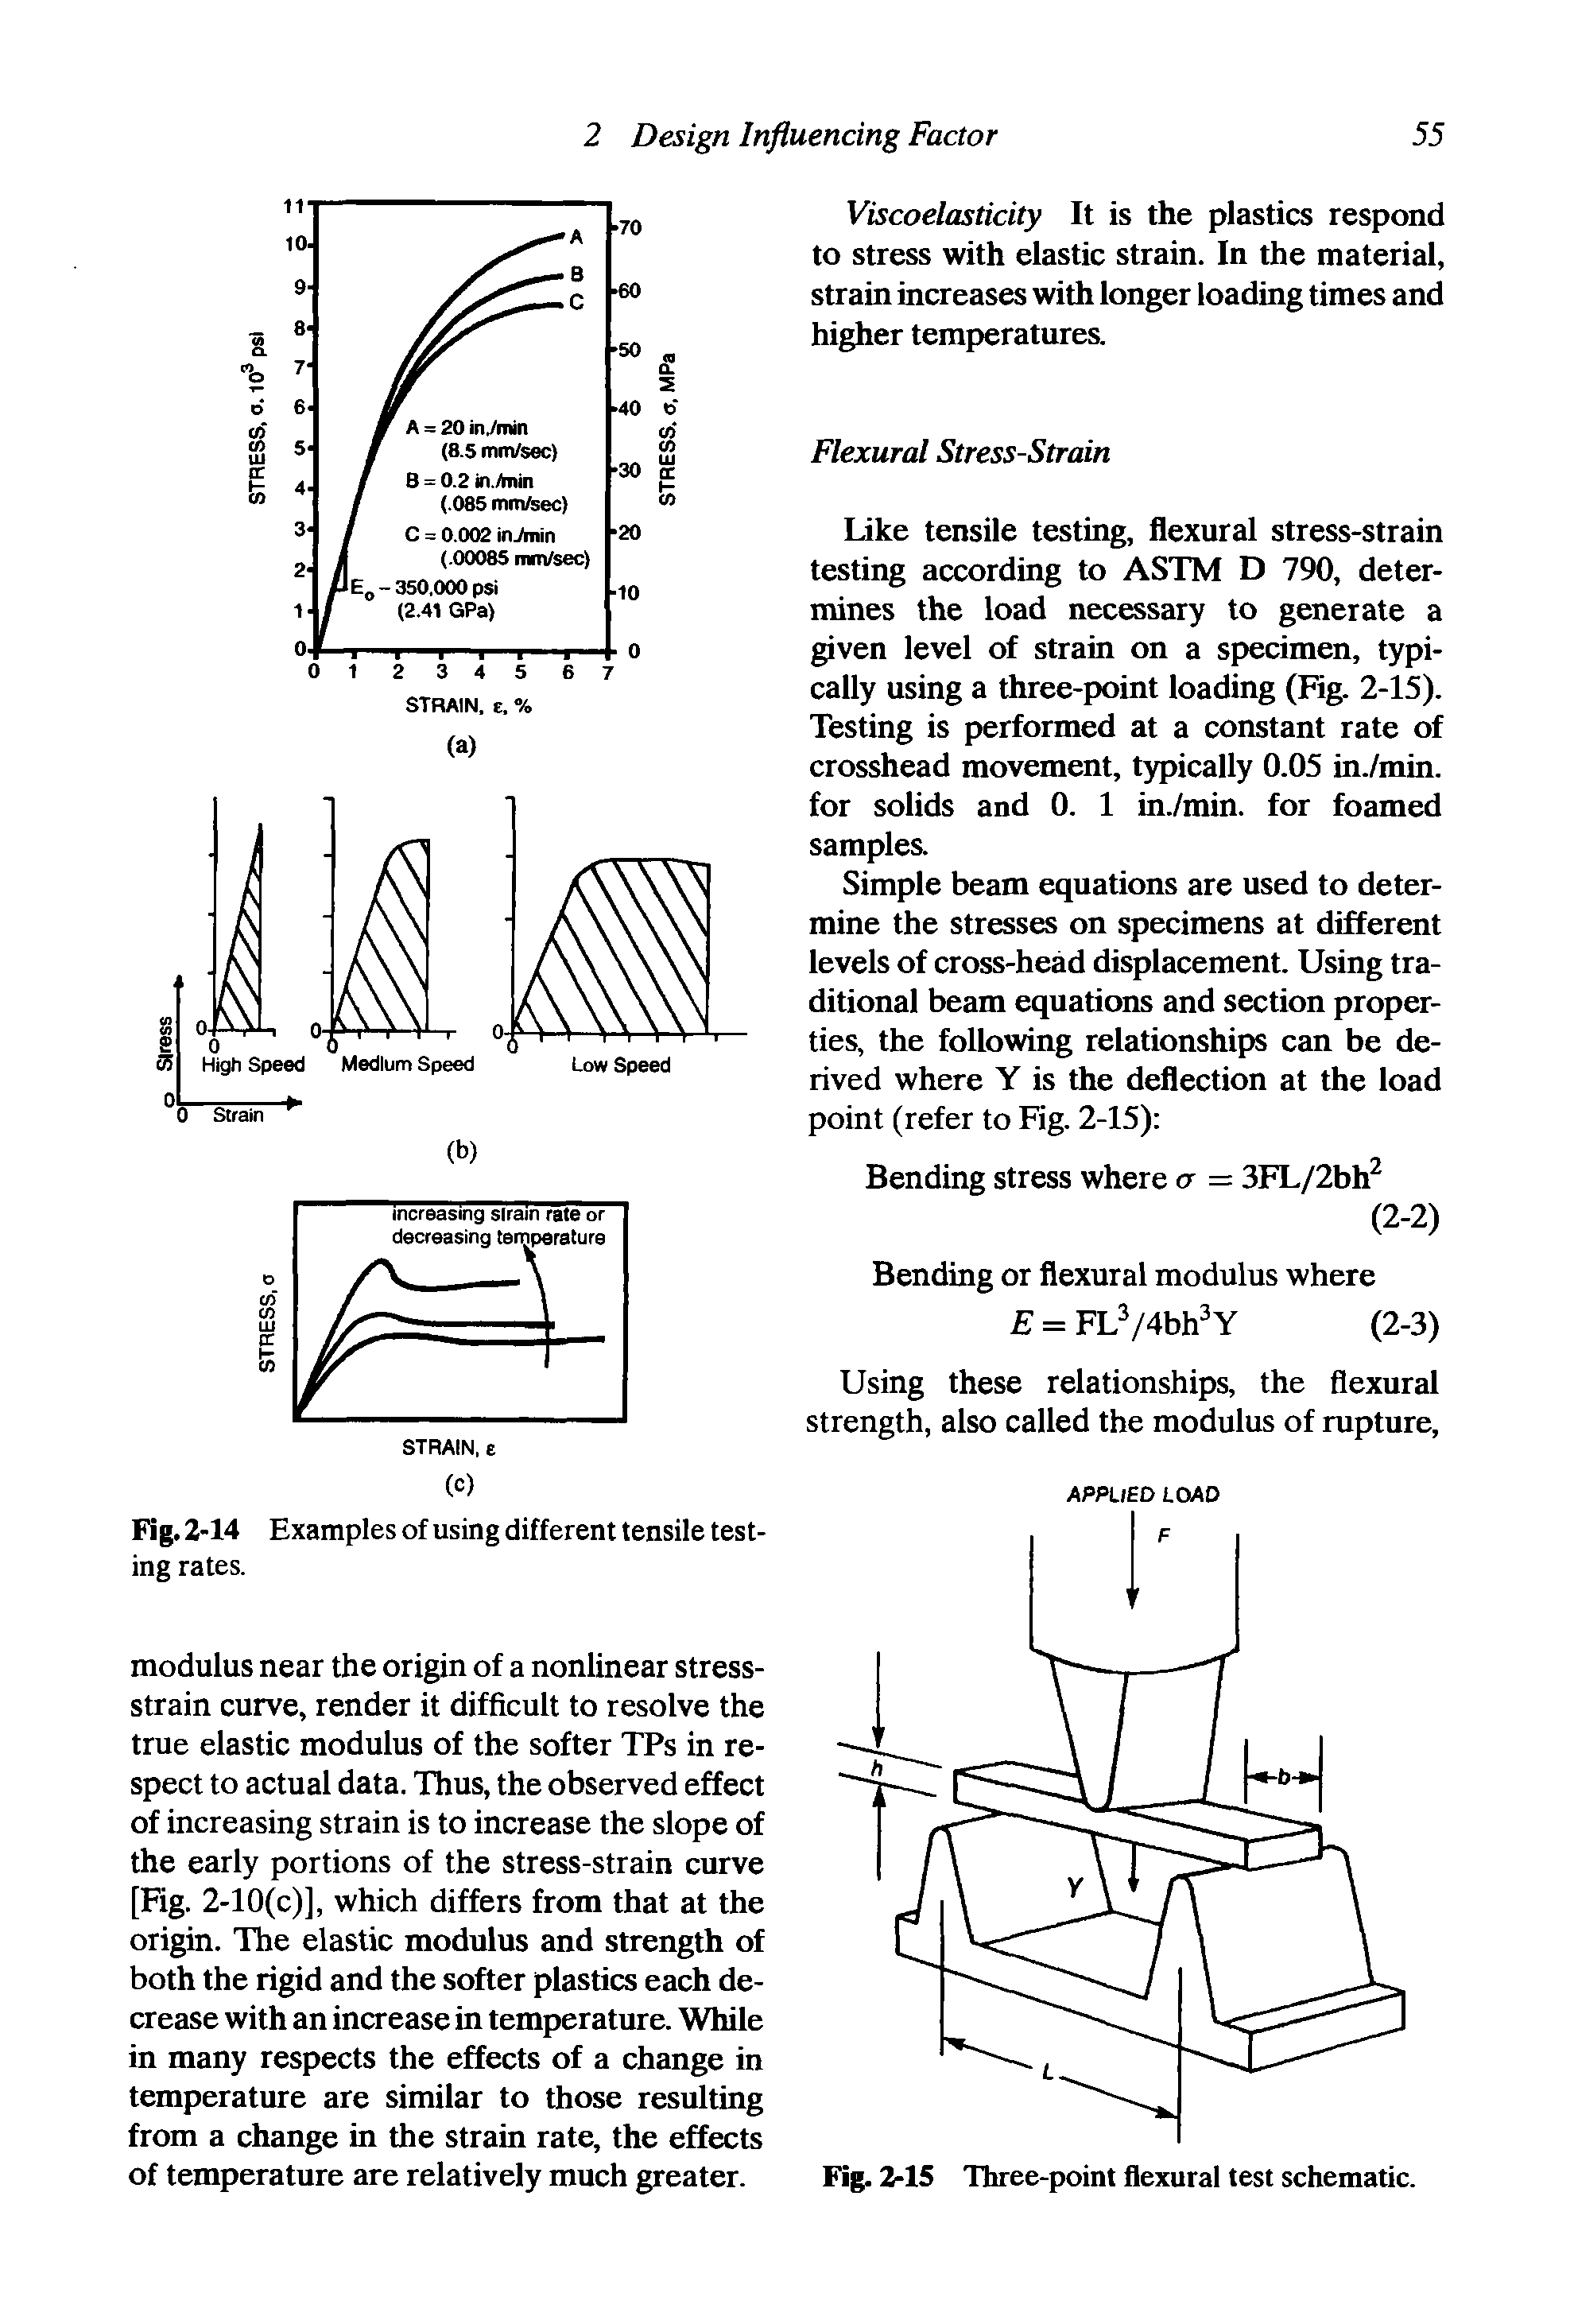 Fig. 2-14 Examples of using different tensile testing rates.